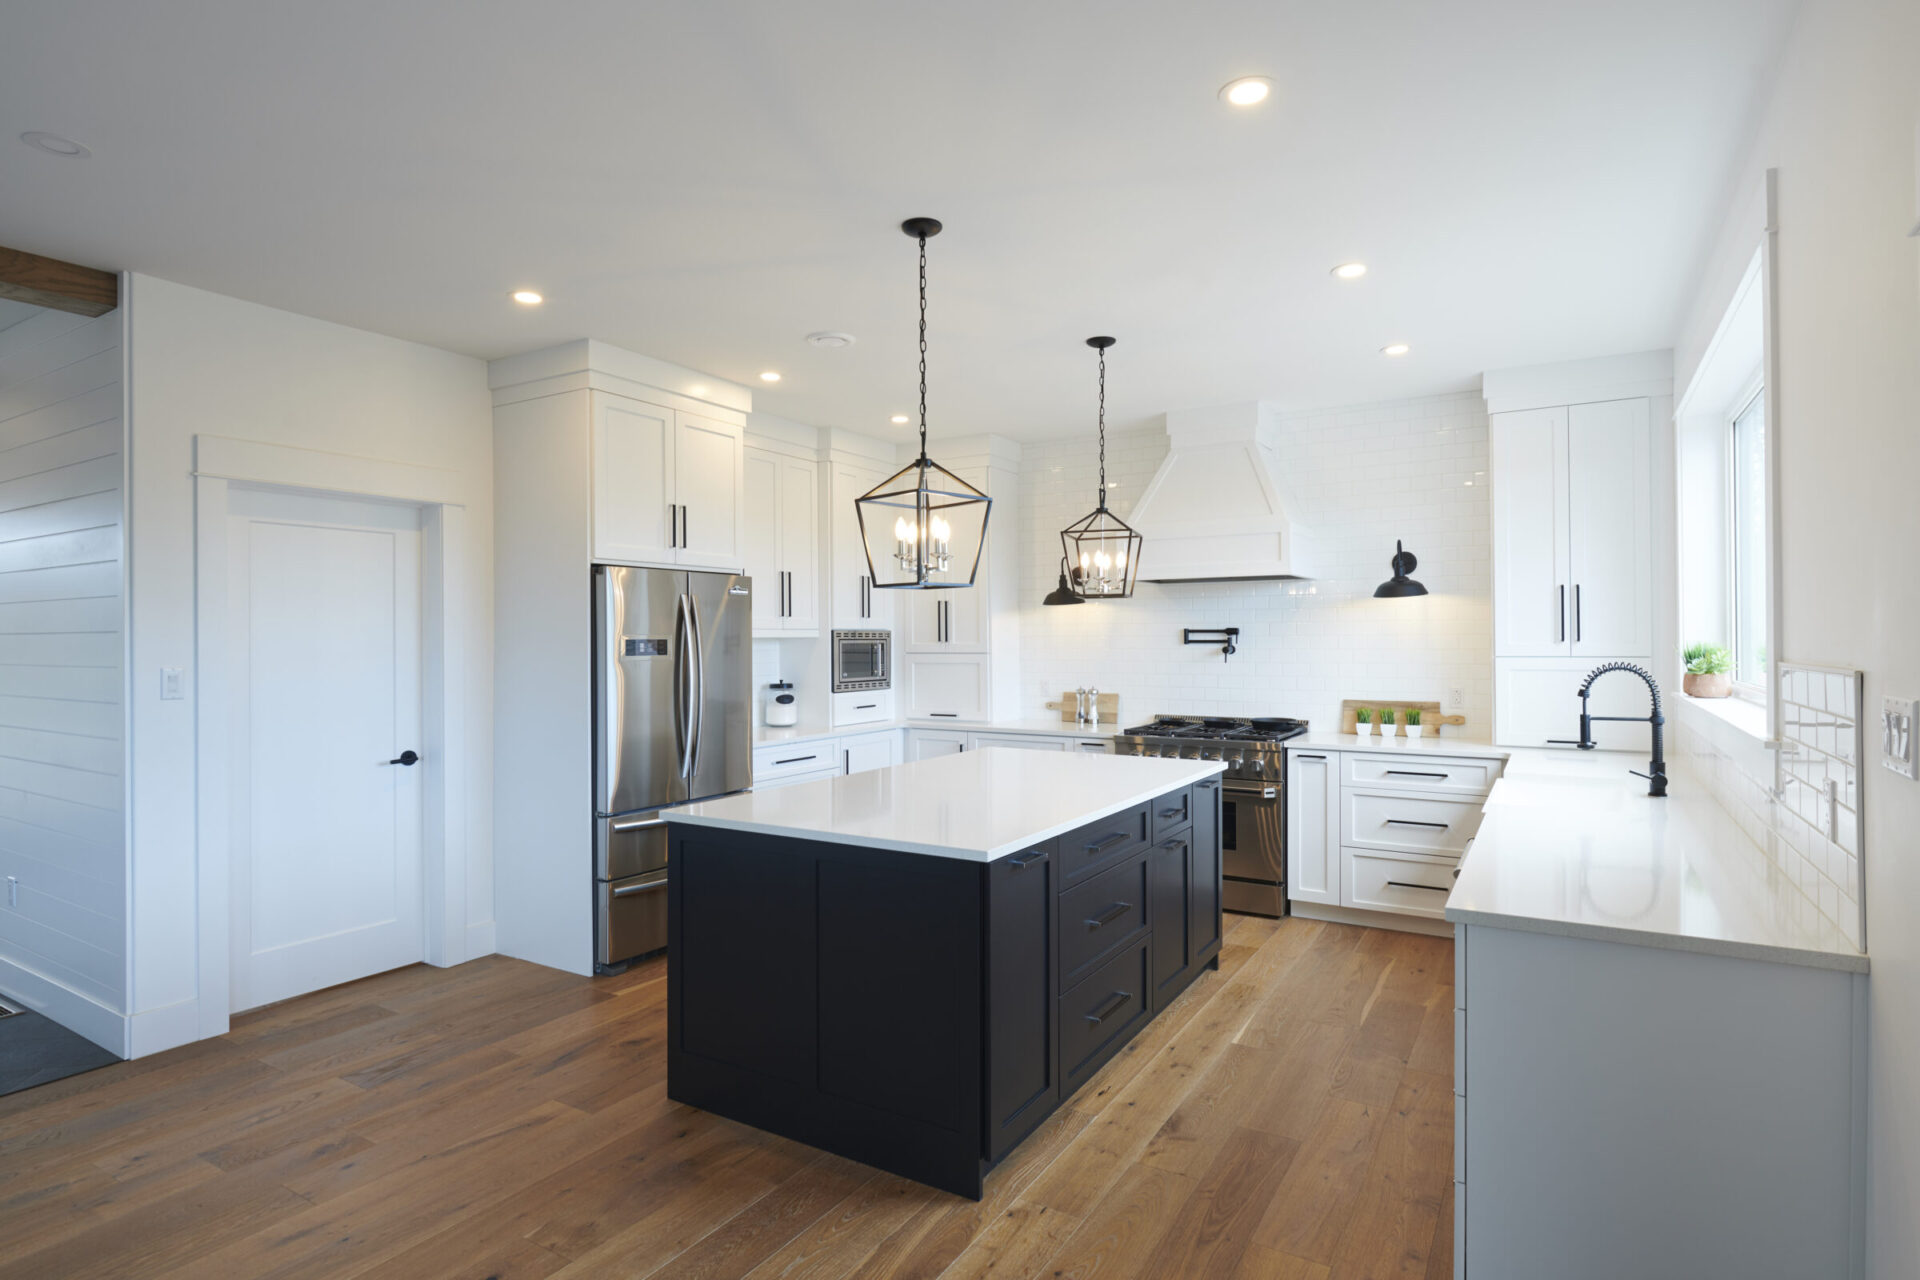 Modern kitchen with white cabinets, dark island, stainless steel appliances, pendant lights, and hardwood floors. Bright, clean, contemporary design.